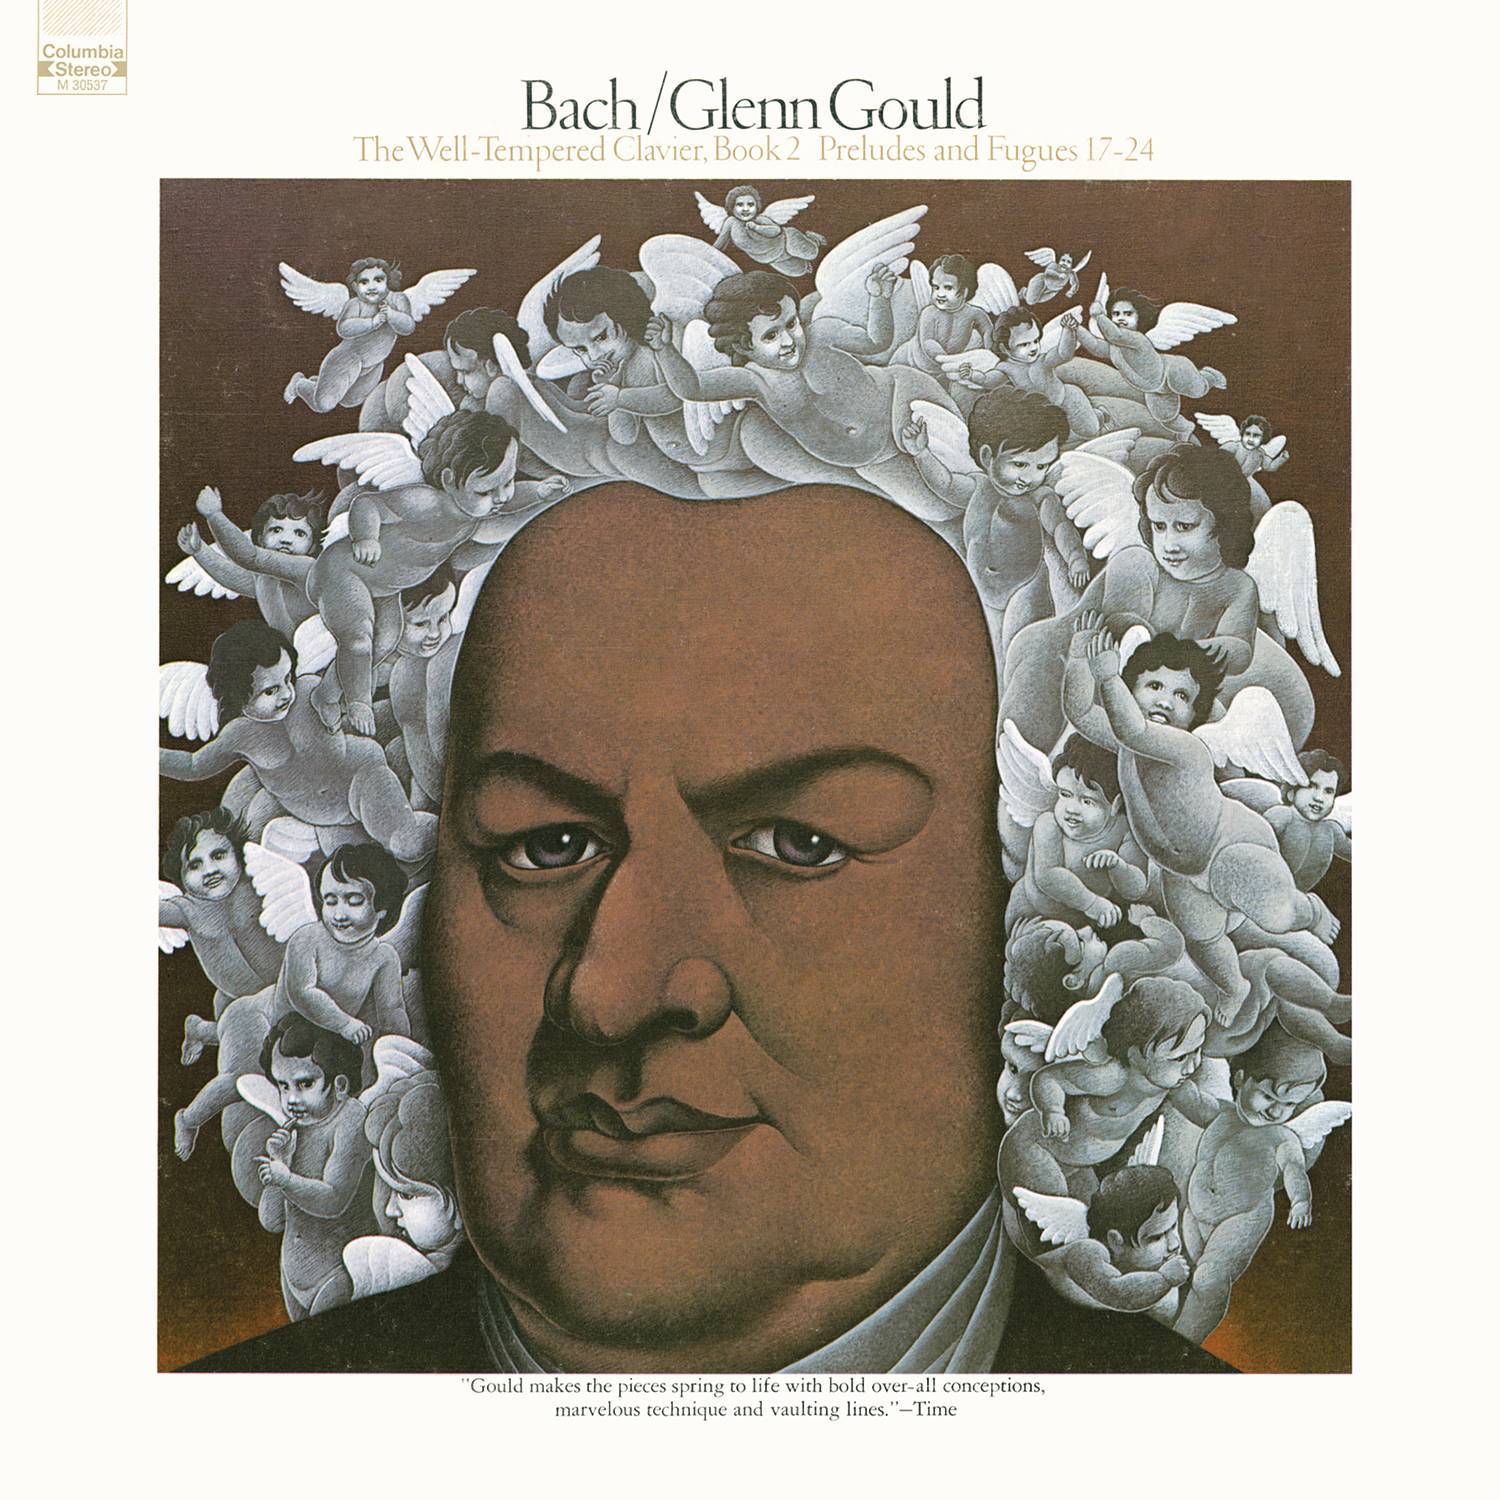 Bach: The Well-Tempered Clavier, Book II, Preludes & Fugues Nos. 17-24, BWV 886-893 - Gould Remaster专辑